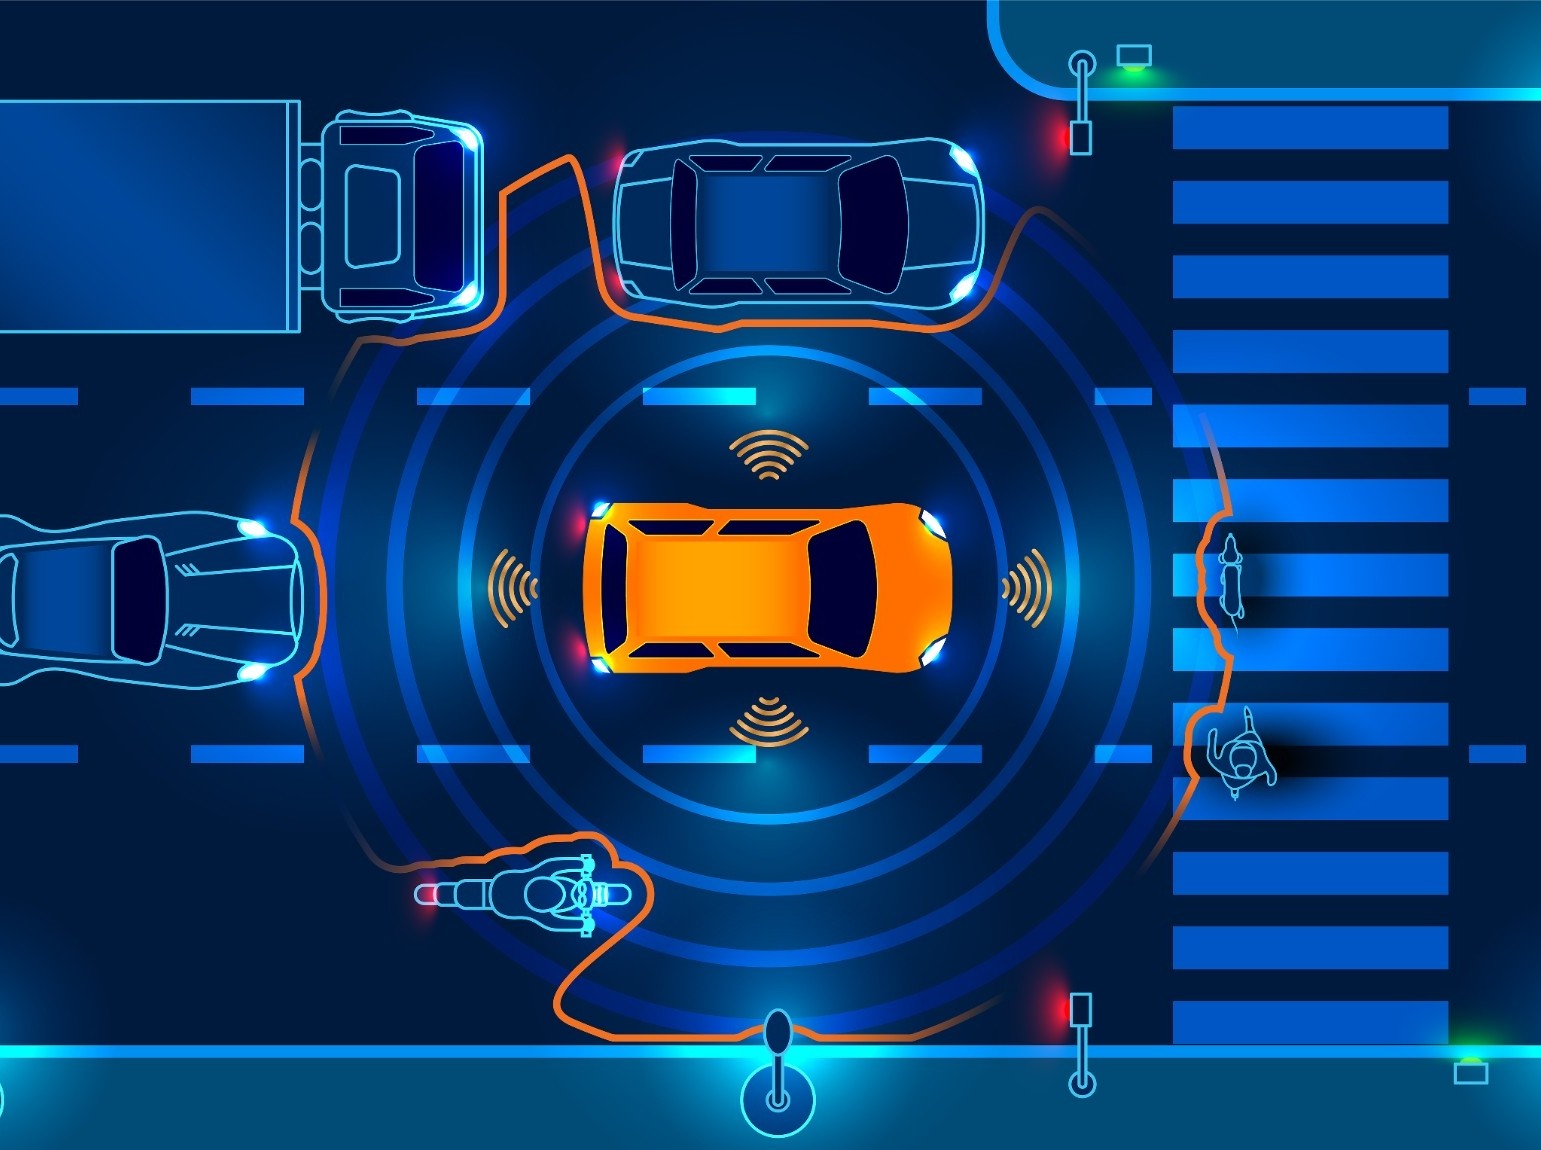 Article About How Next Generation Autonomous Vehicles Will Be Safer